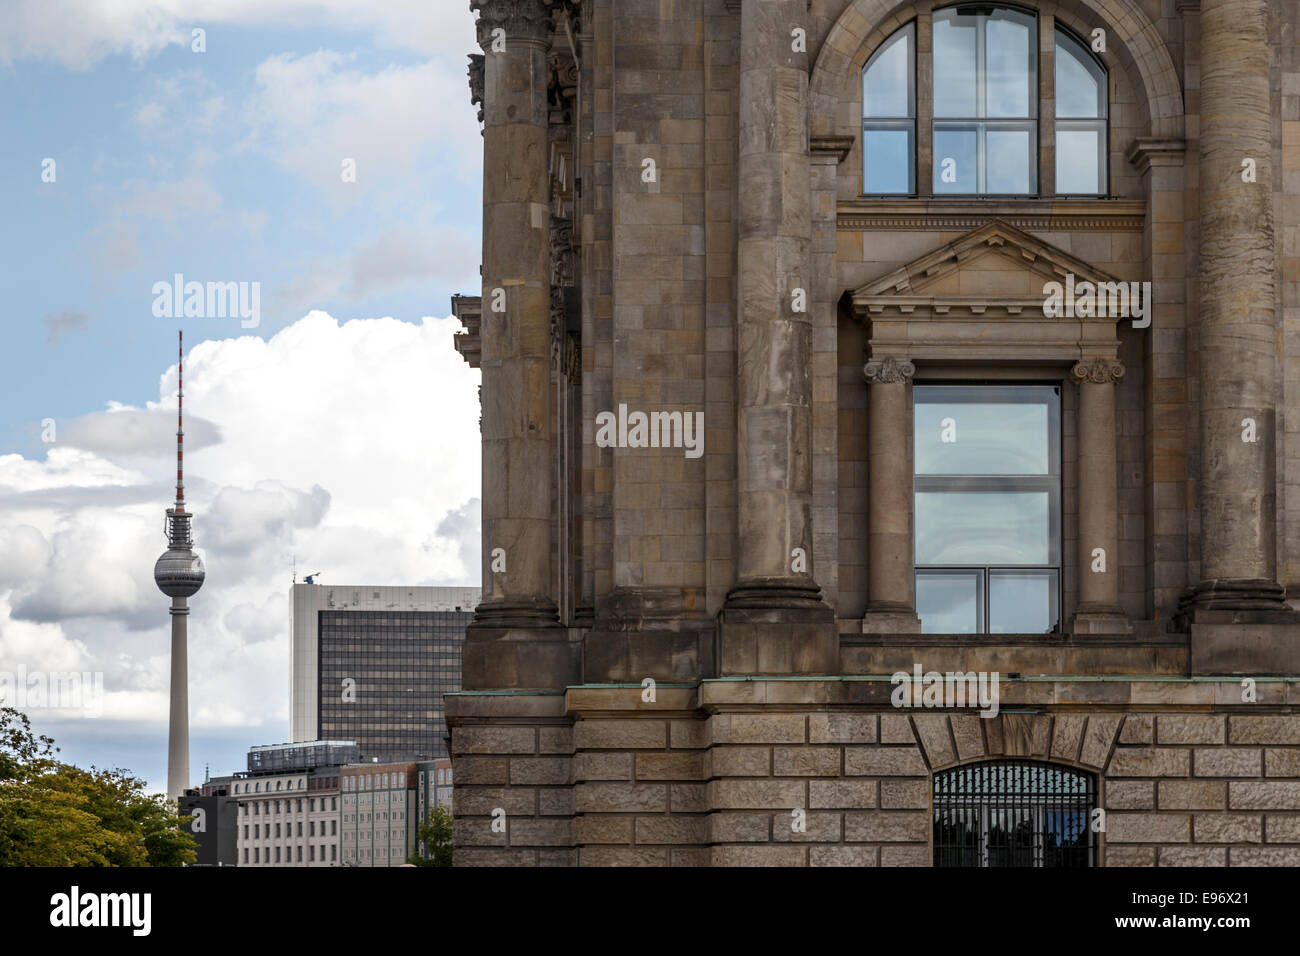 Corner of Bundestag (or Reichstag) building with TV tower in background, Berlin, Germany Stock Photo